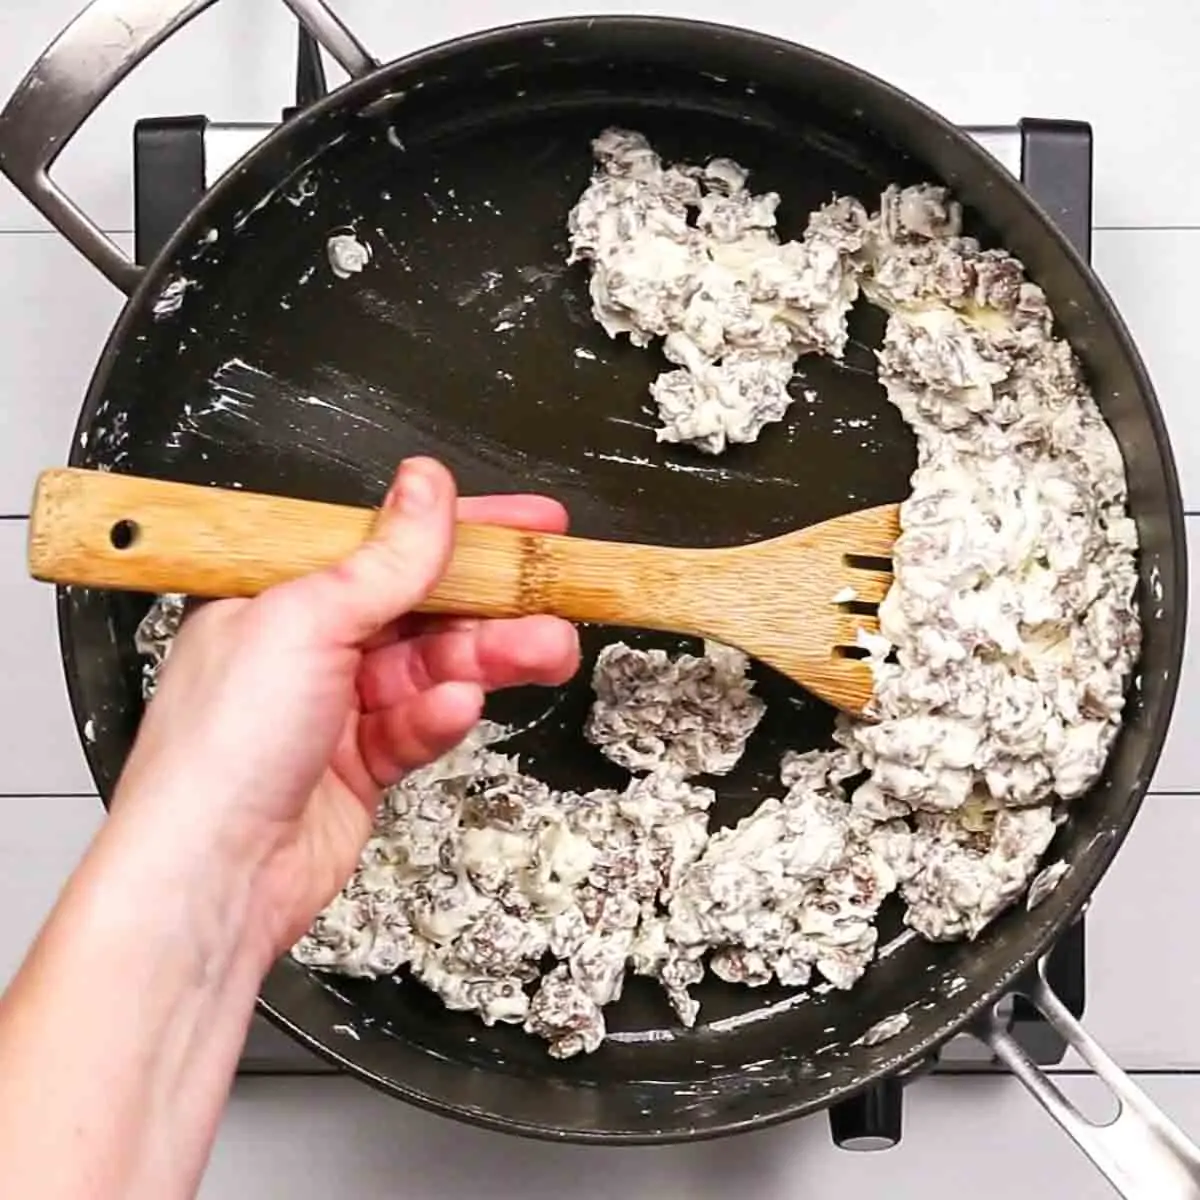 Stirring a creamy sausage mixture in a black frying pan with a wooden spatula to make Spinach and Sausage Quiche